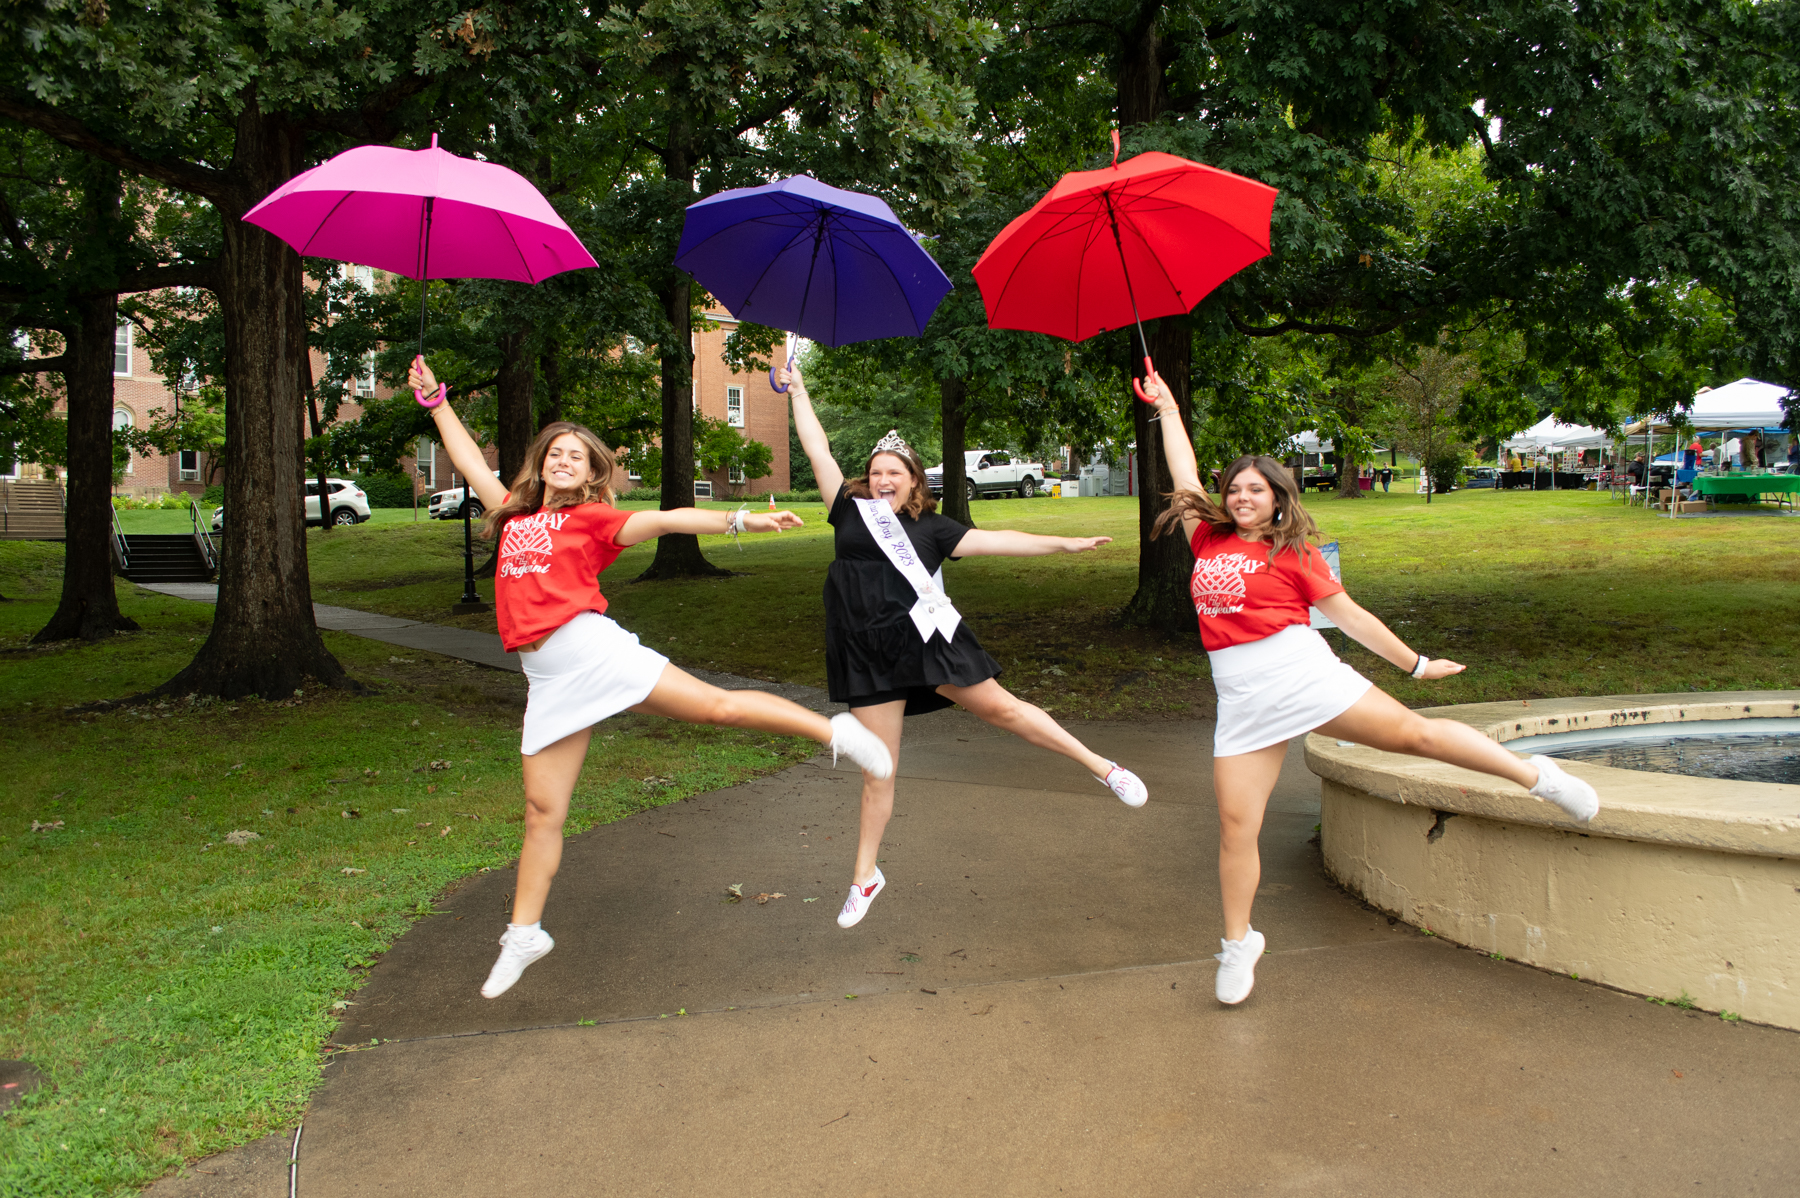 Photograph of three female teenagers jumping while holding an umbrella.